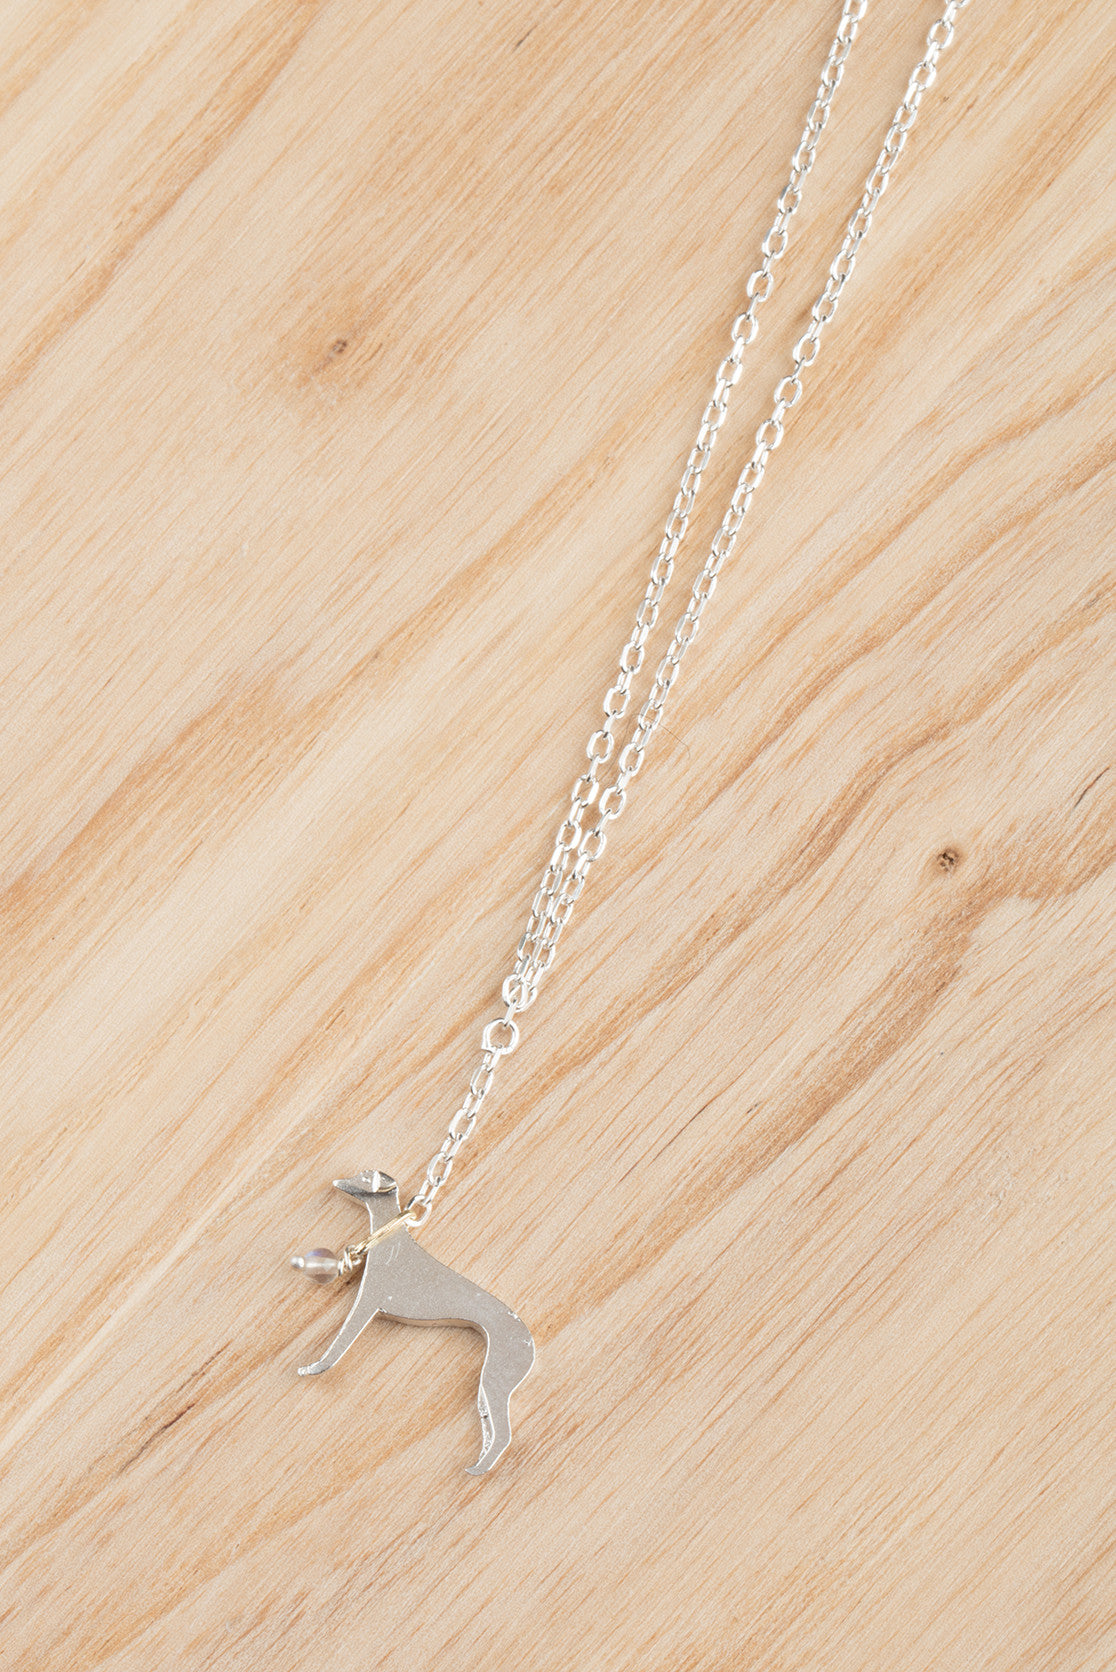 Whippet On a Lead Necklace